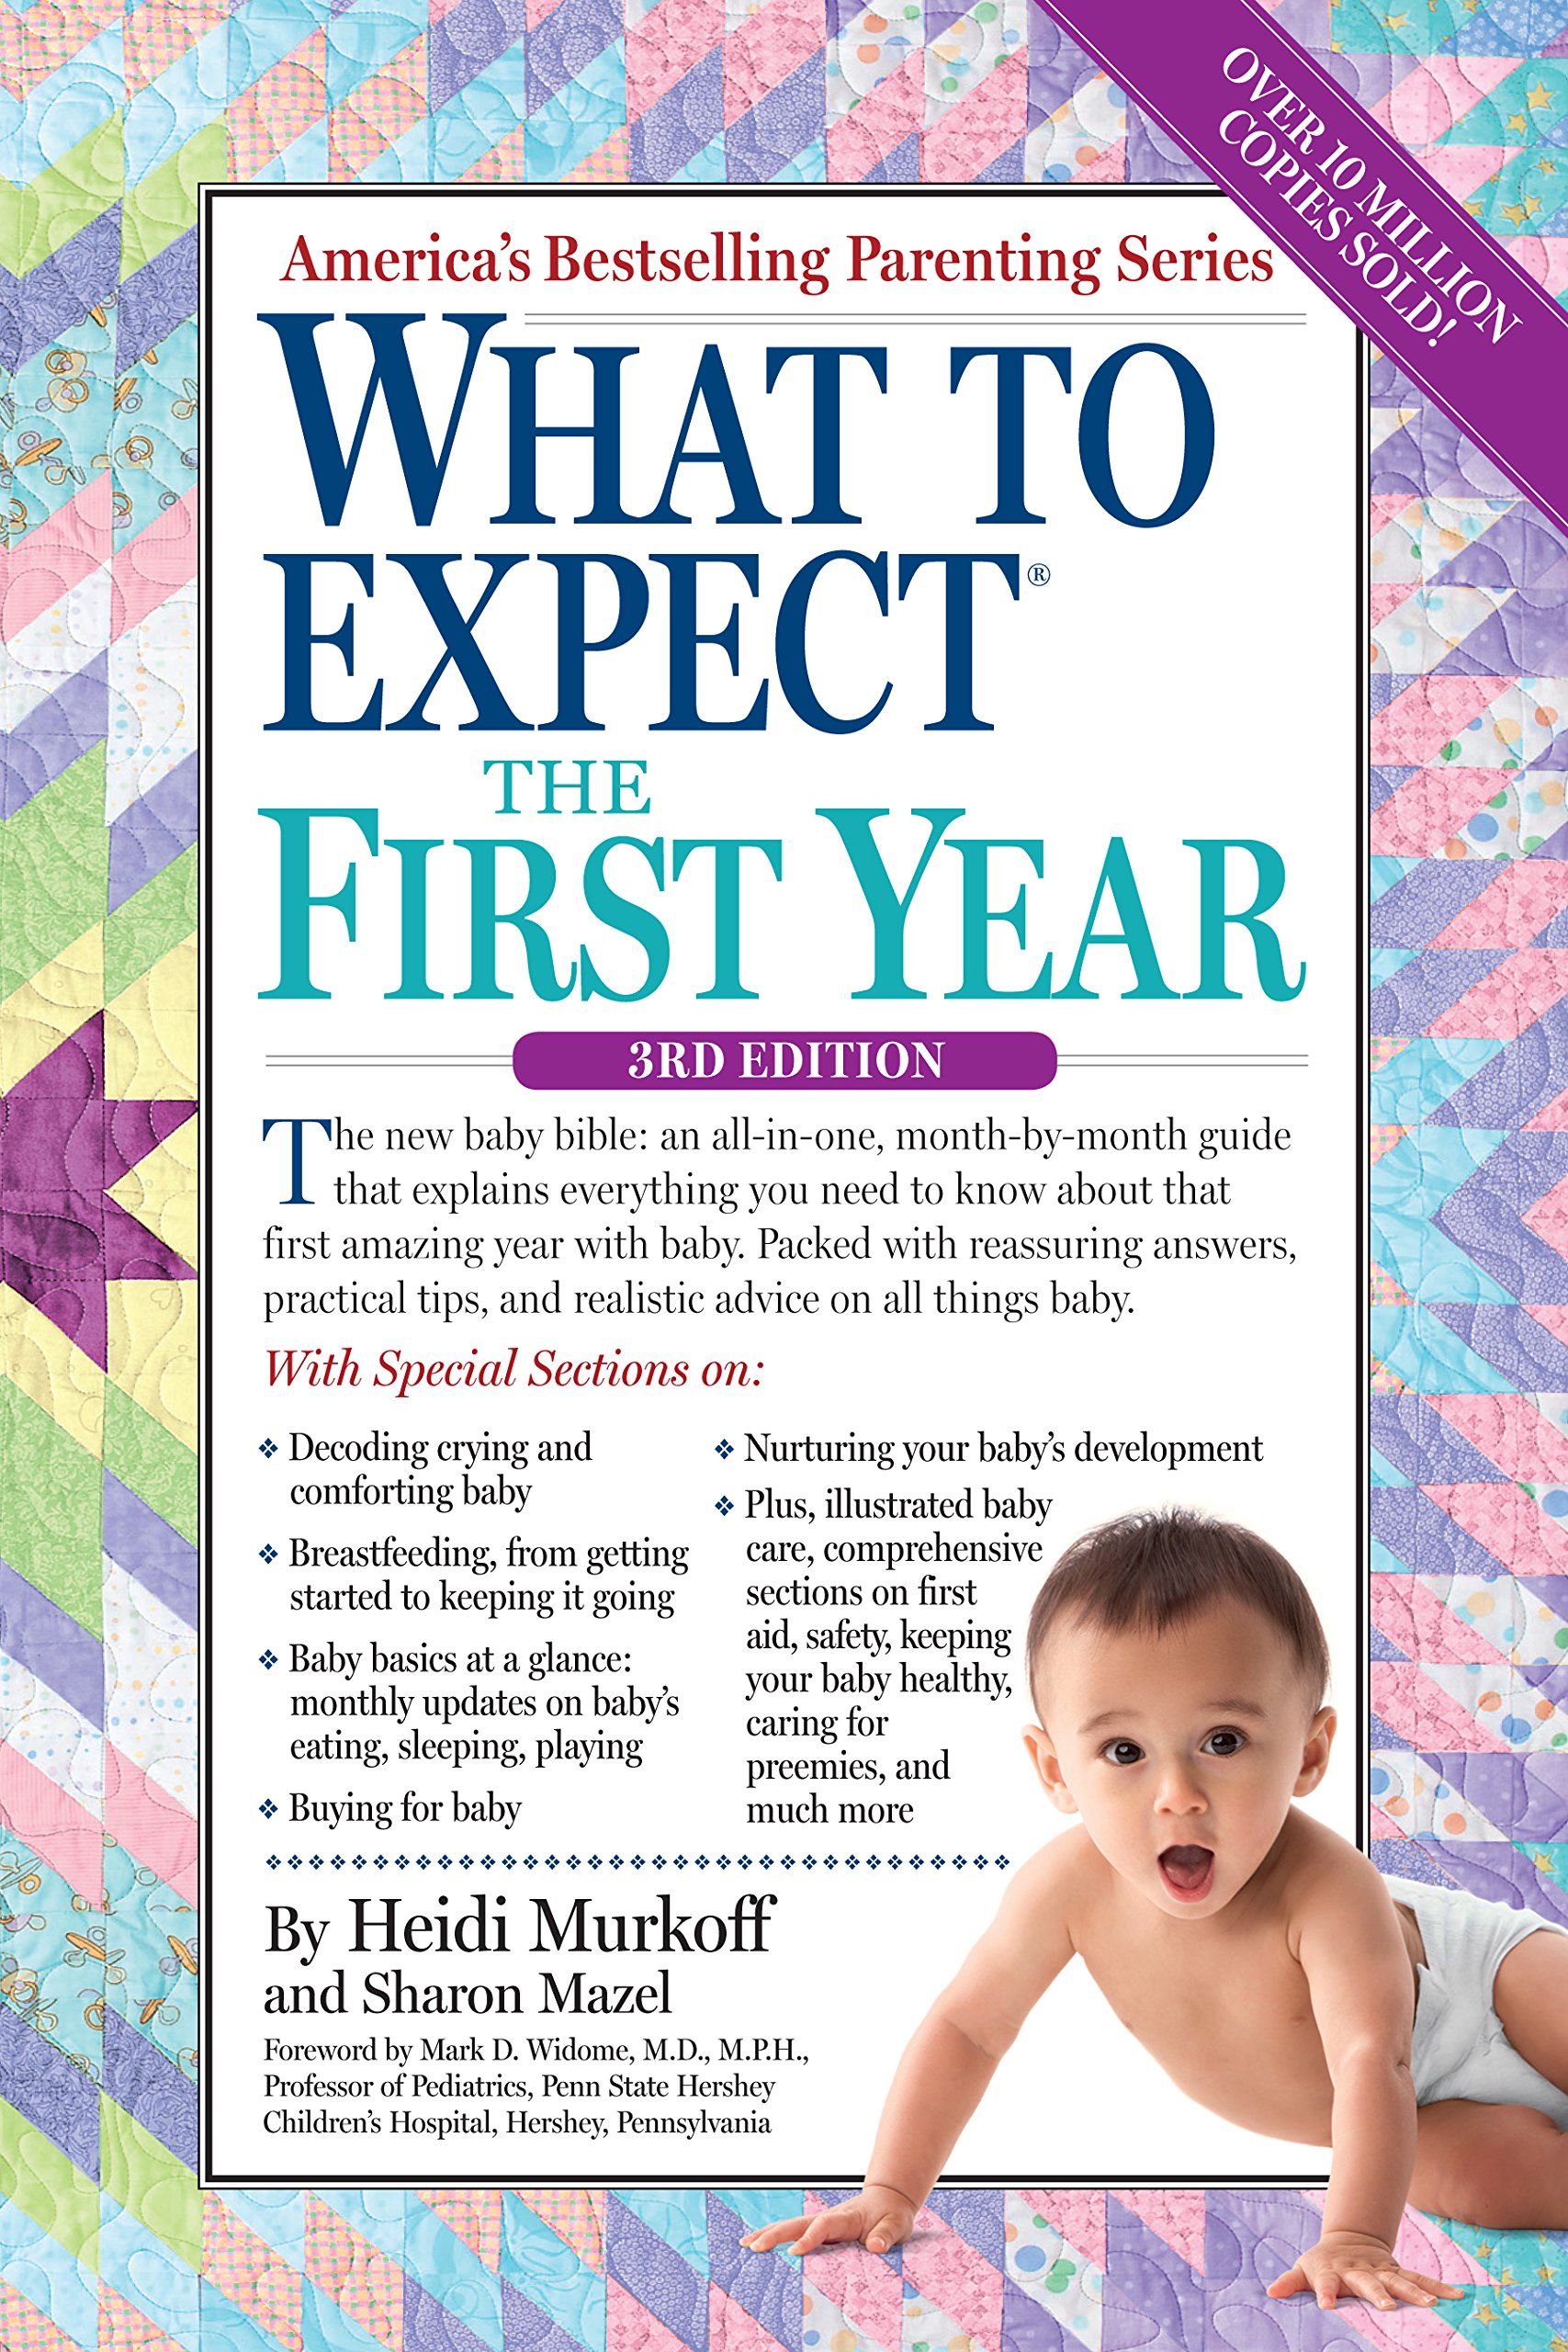 Book cover of "What to Expect the First Year" by Heidi Murkoff.